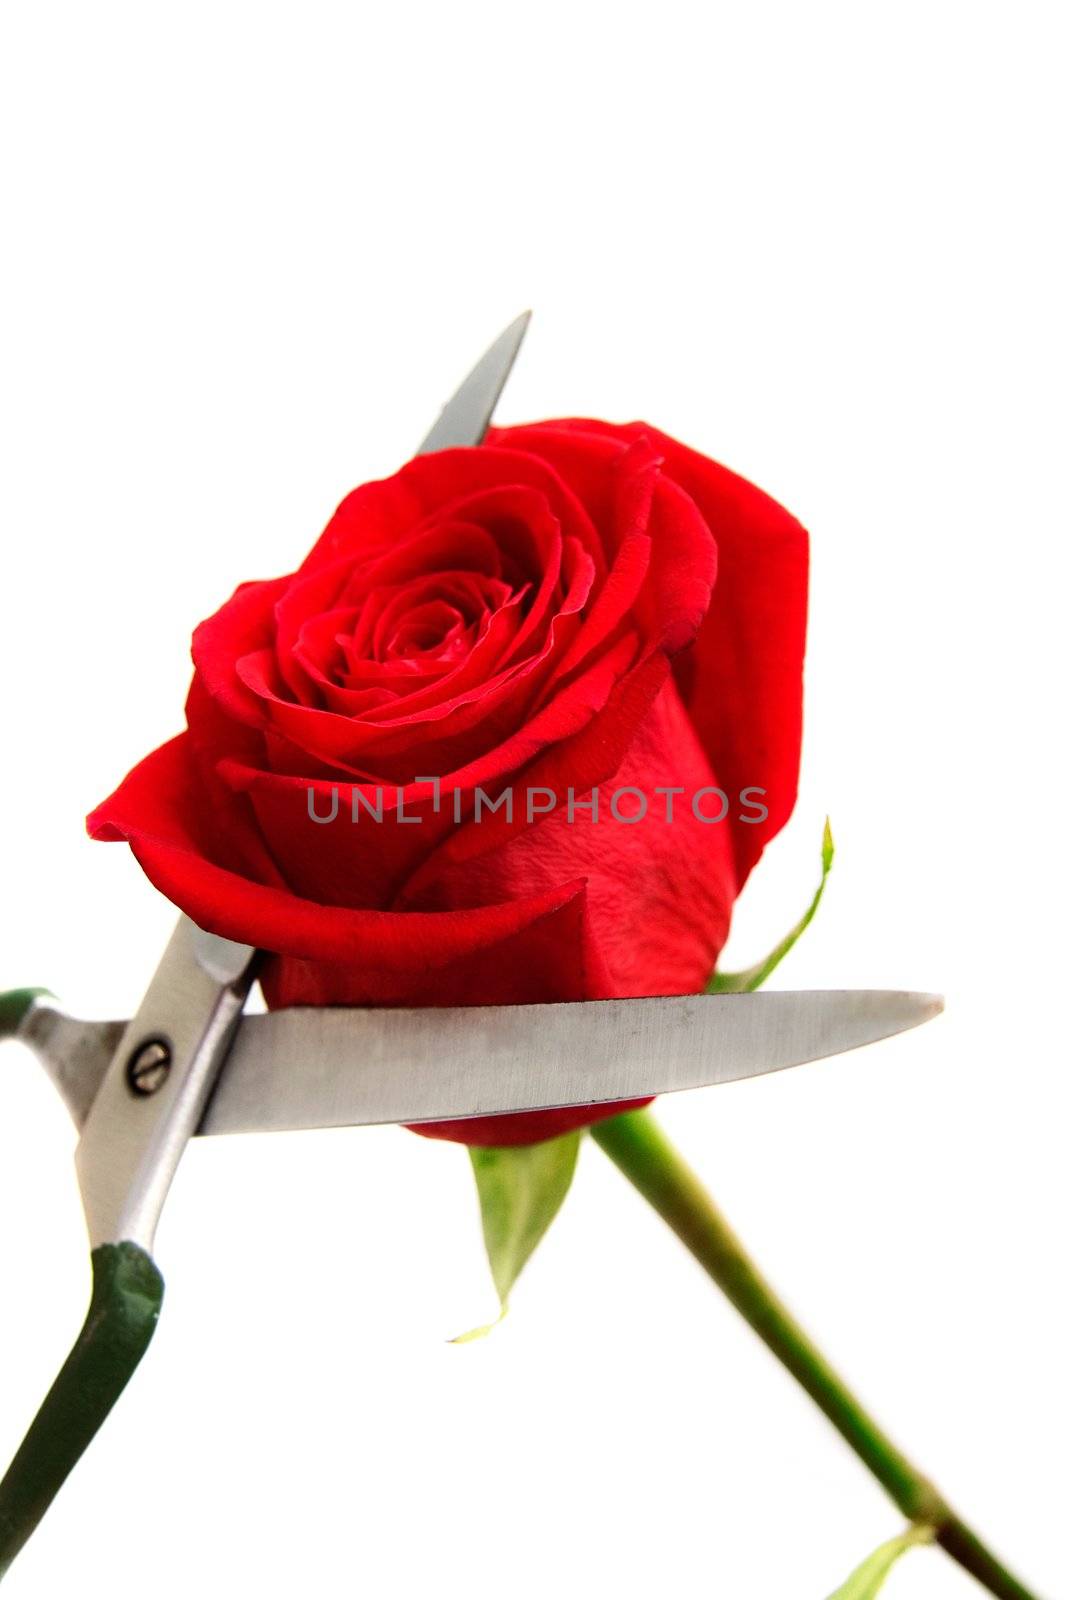 Red rose and scissors by ardni